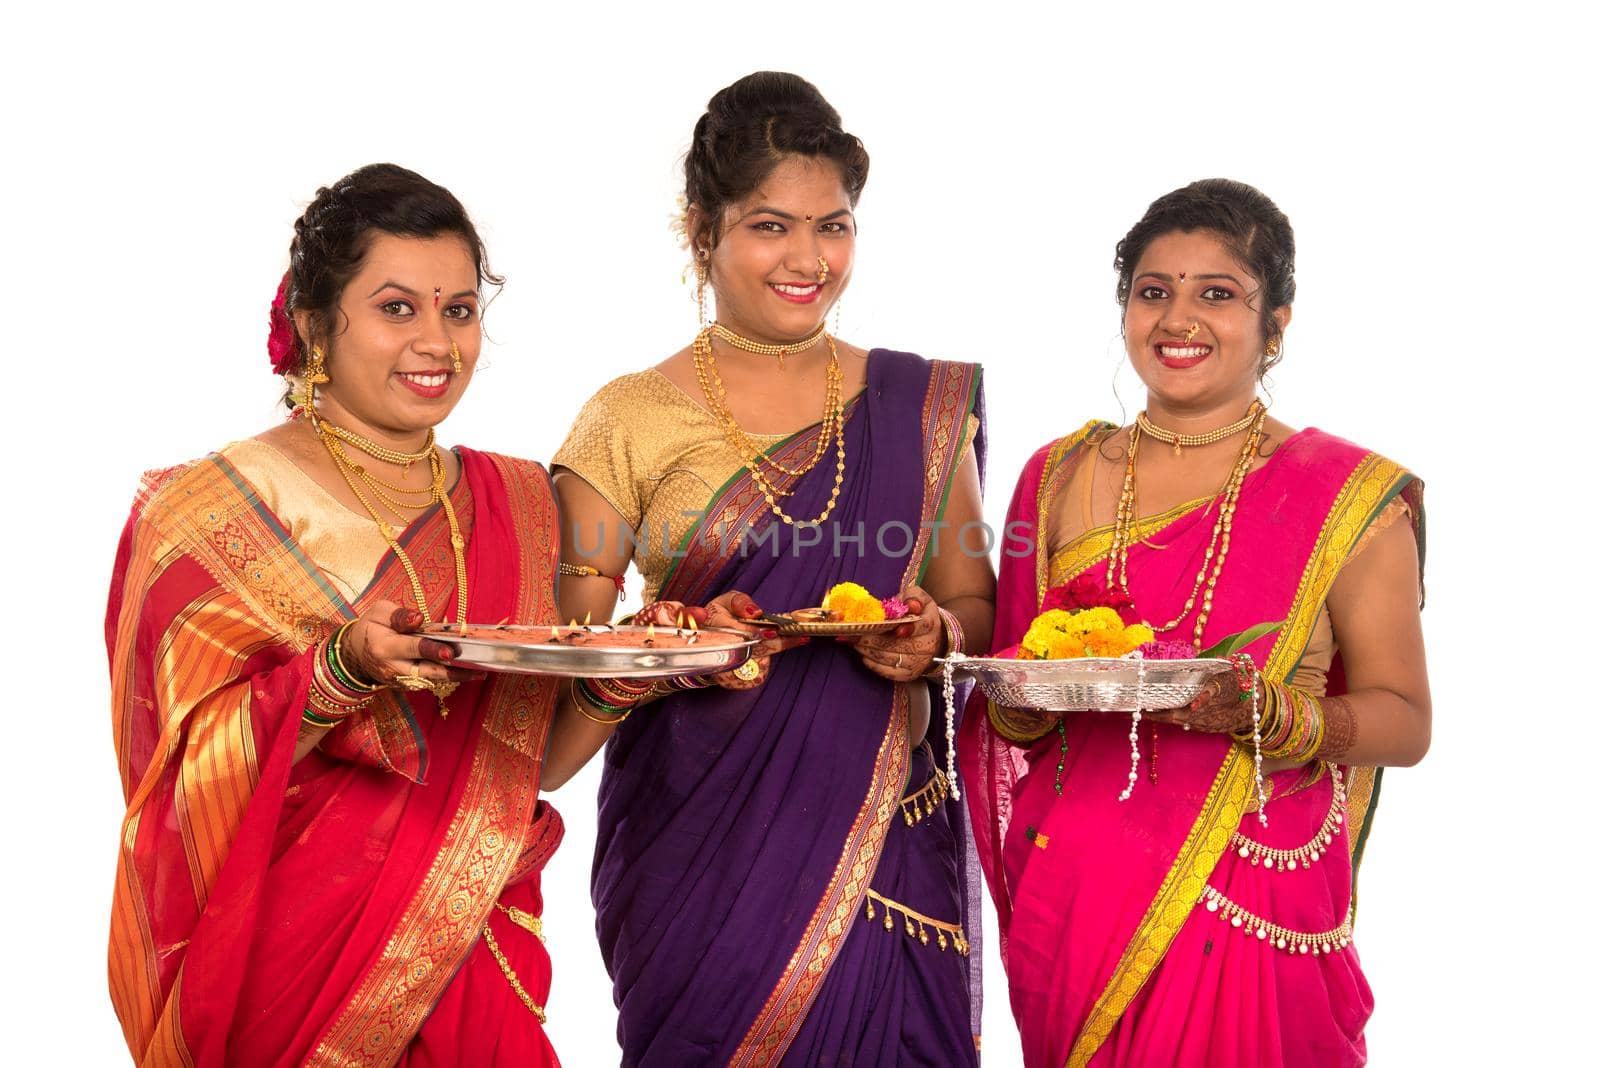 Portrait of Indian Traditional Girls holding diya and flower thali, Sisters celebrating Diwali or deepavali holding oil lamp during festival on white background